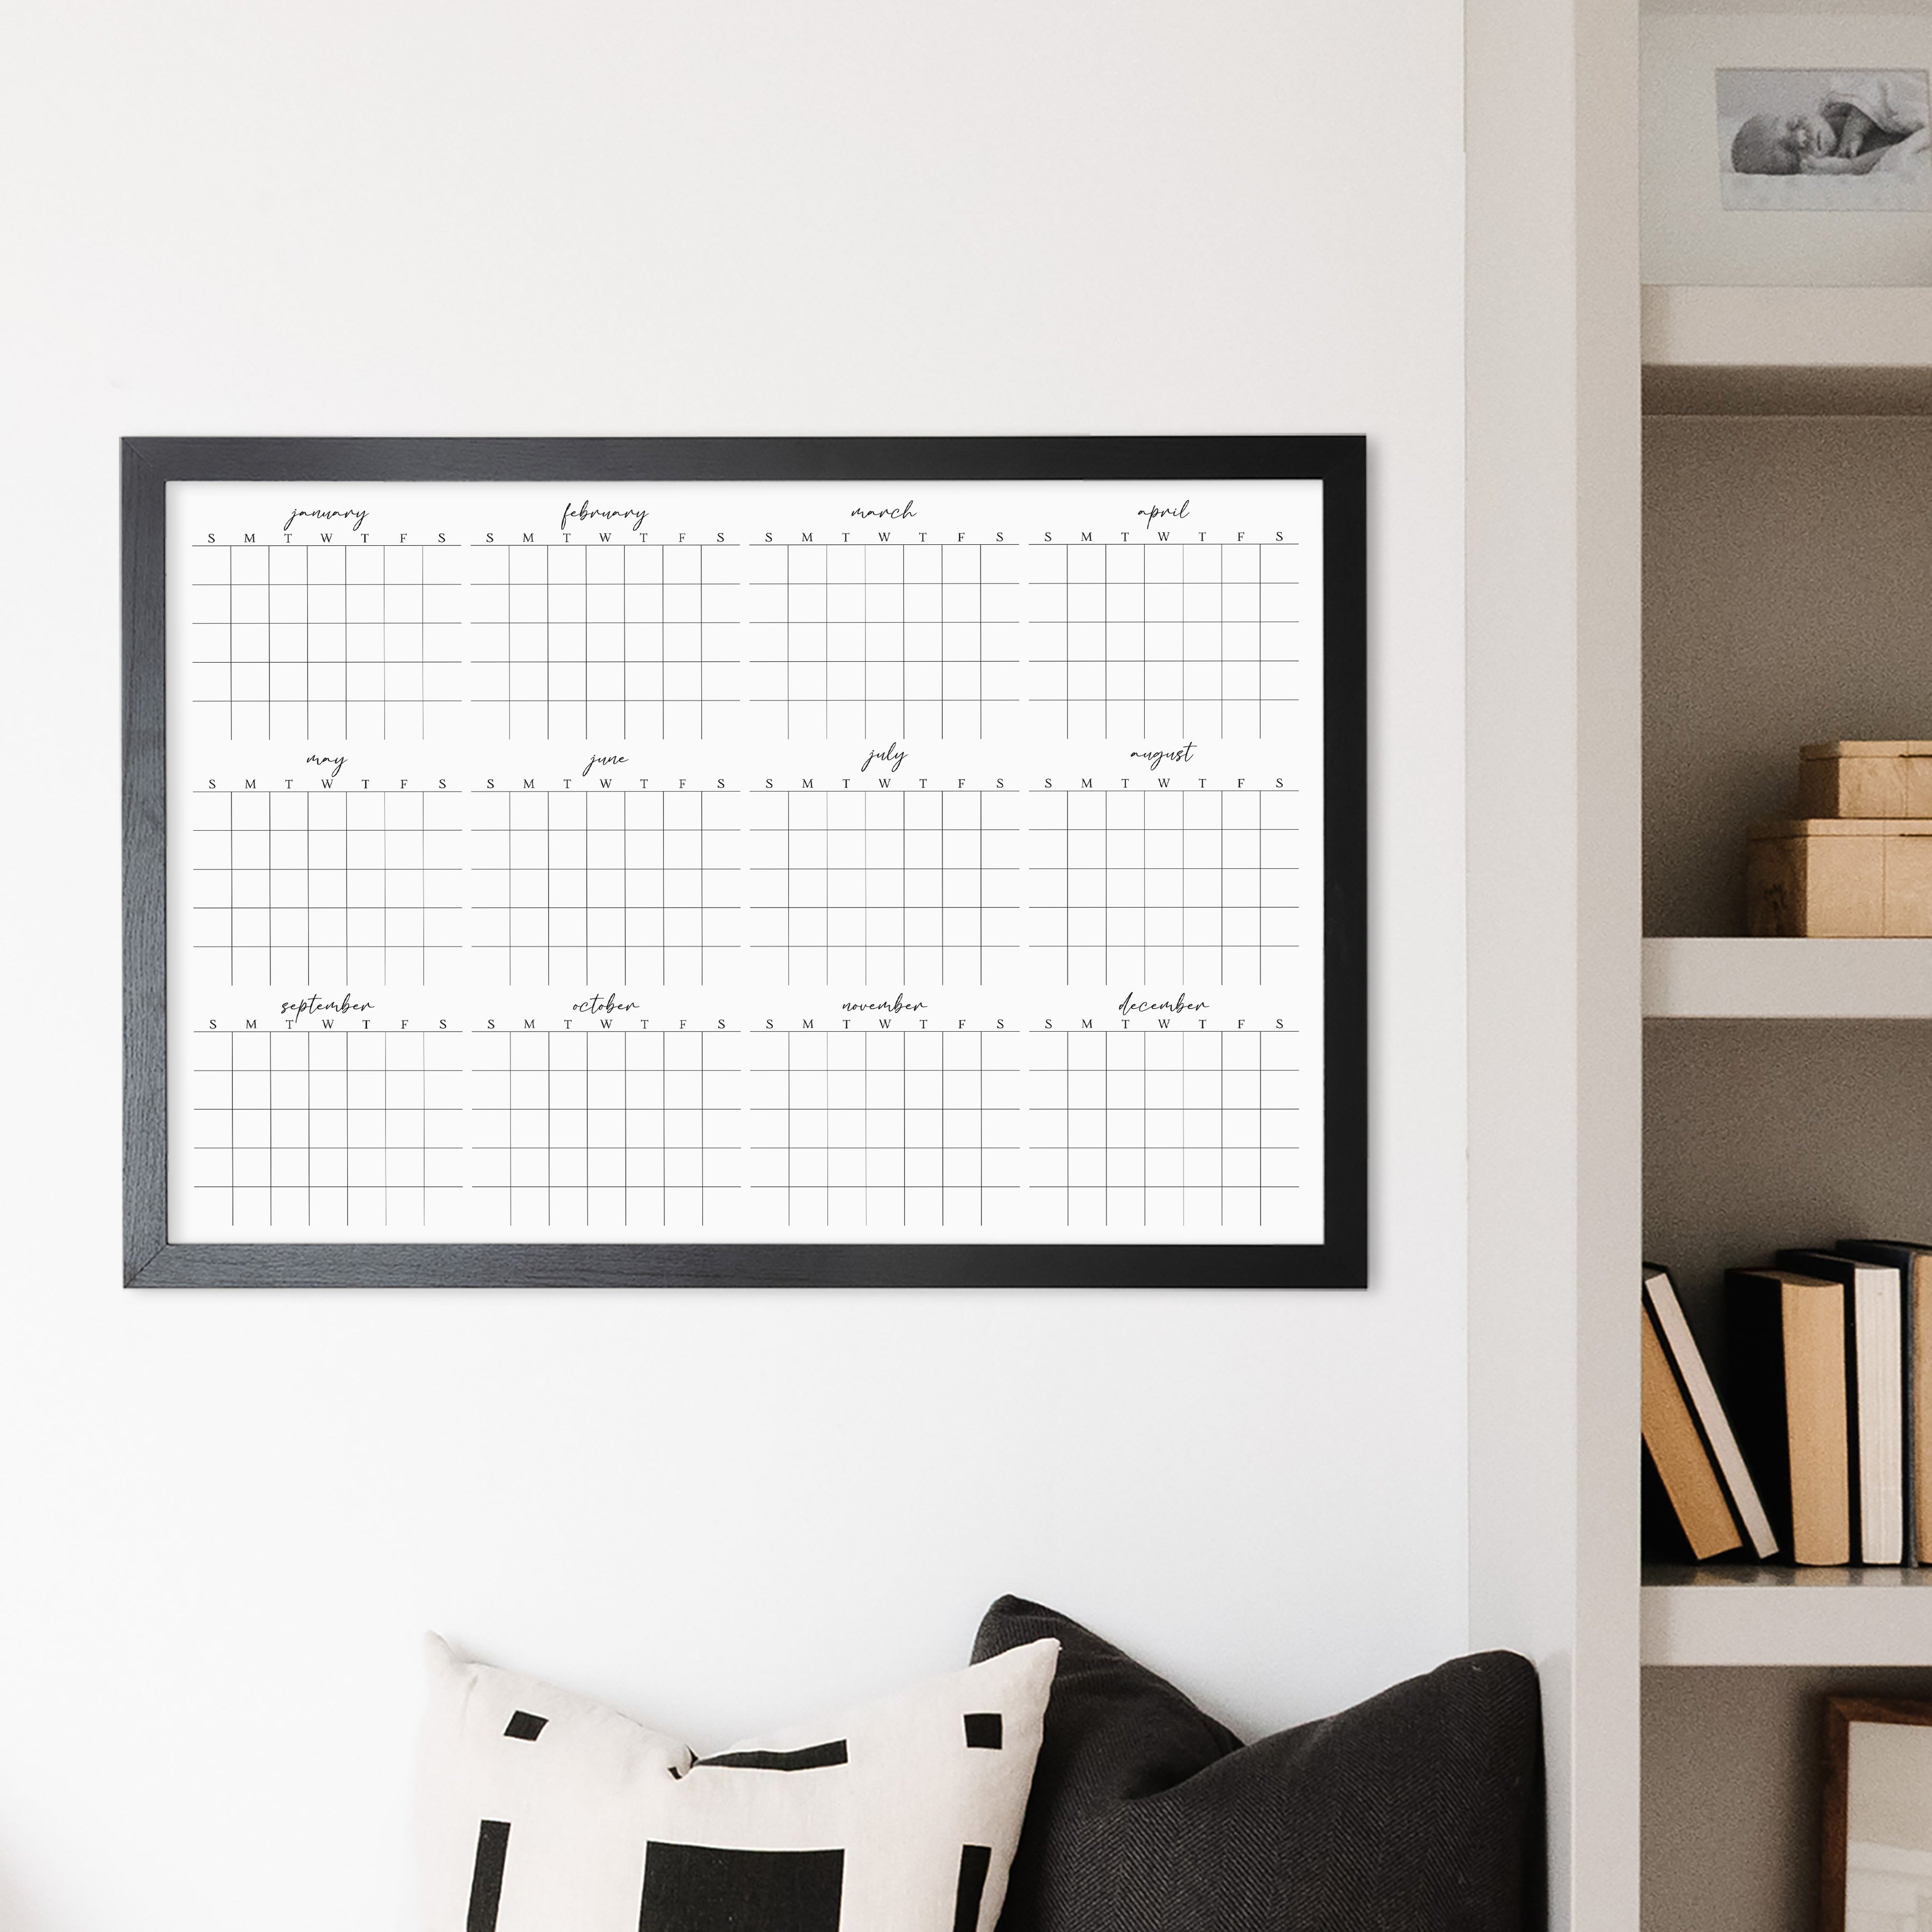 A framed whiteboard yearly calendar hanging up on the wall